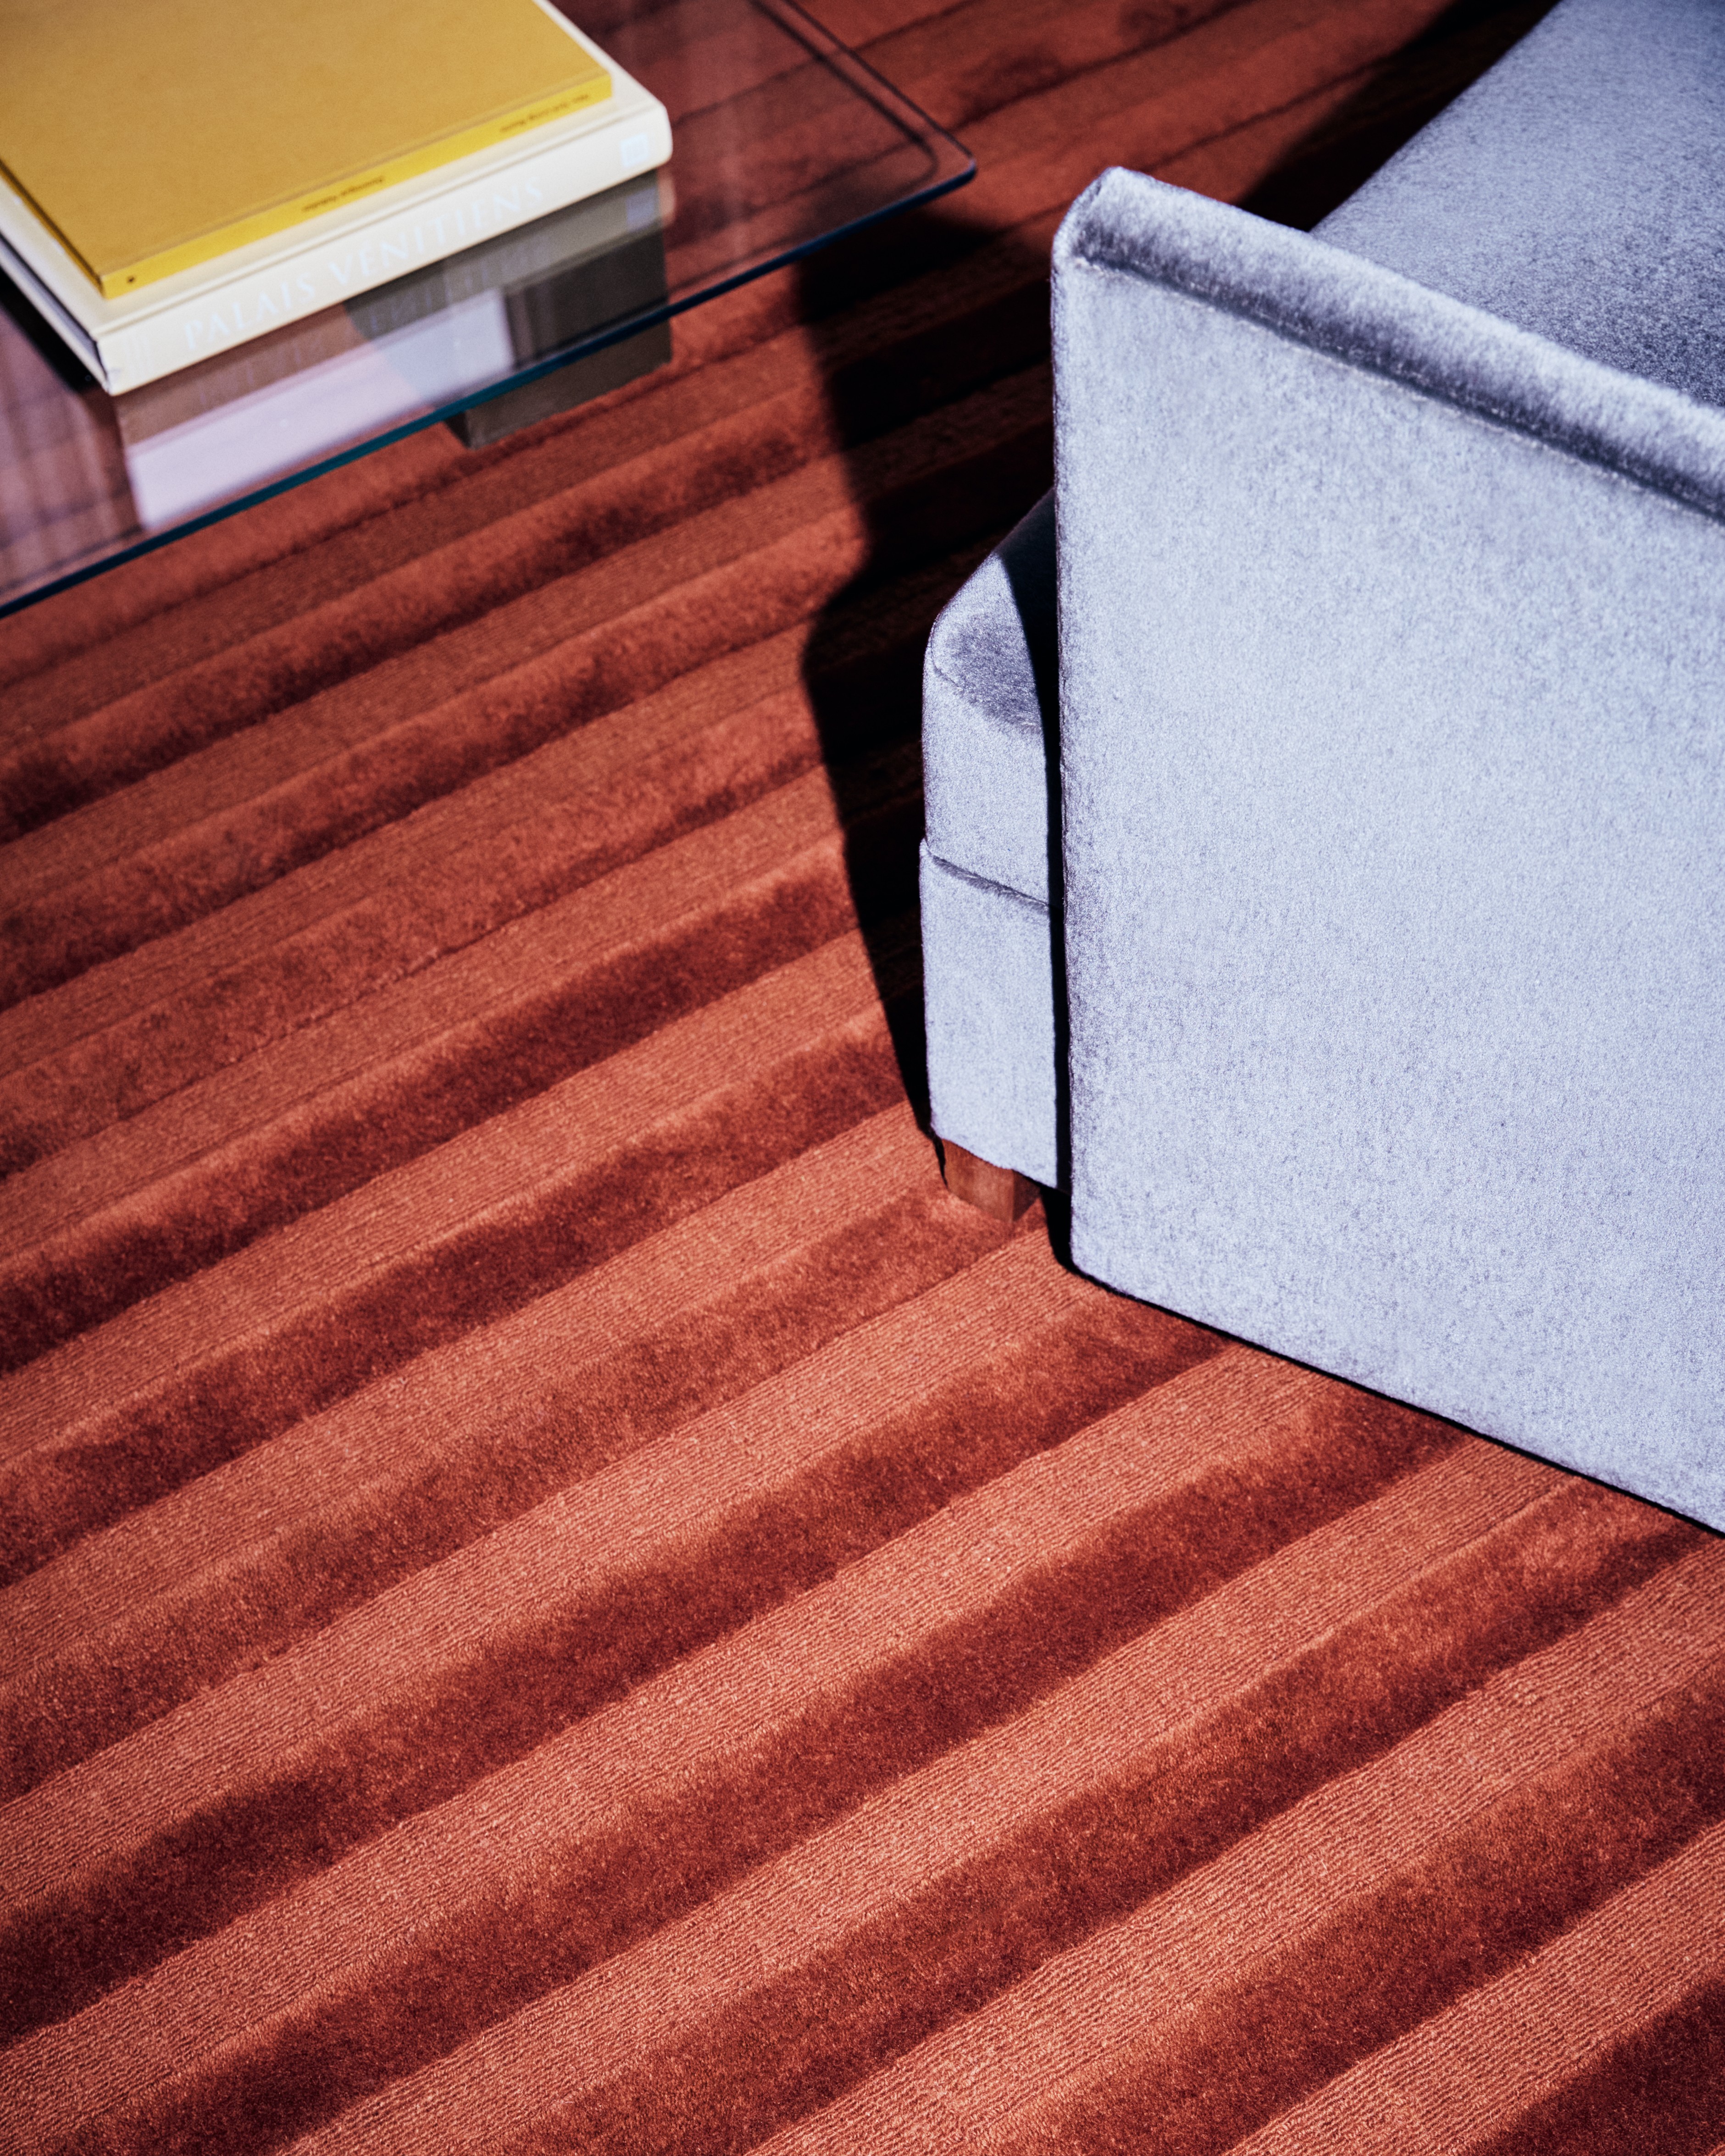 a chair sitting on top of a wooden floor next to a book